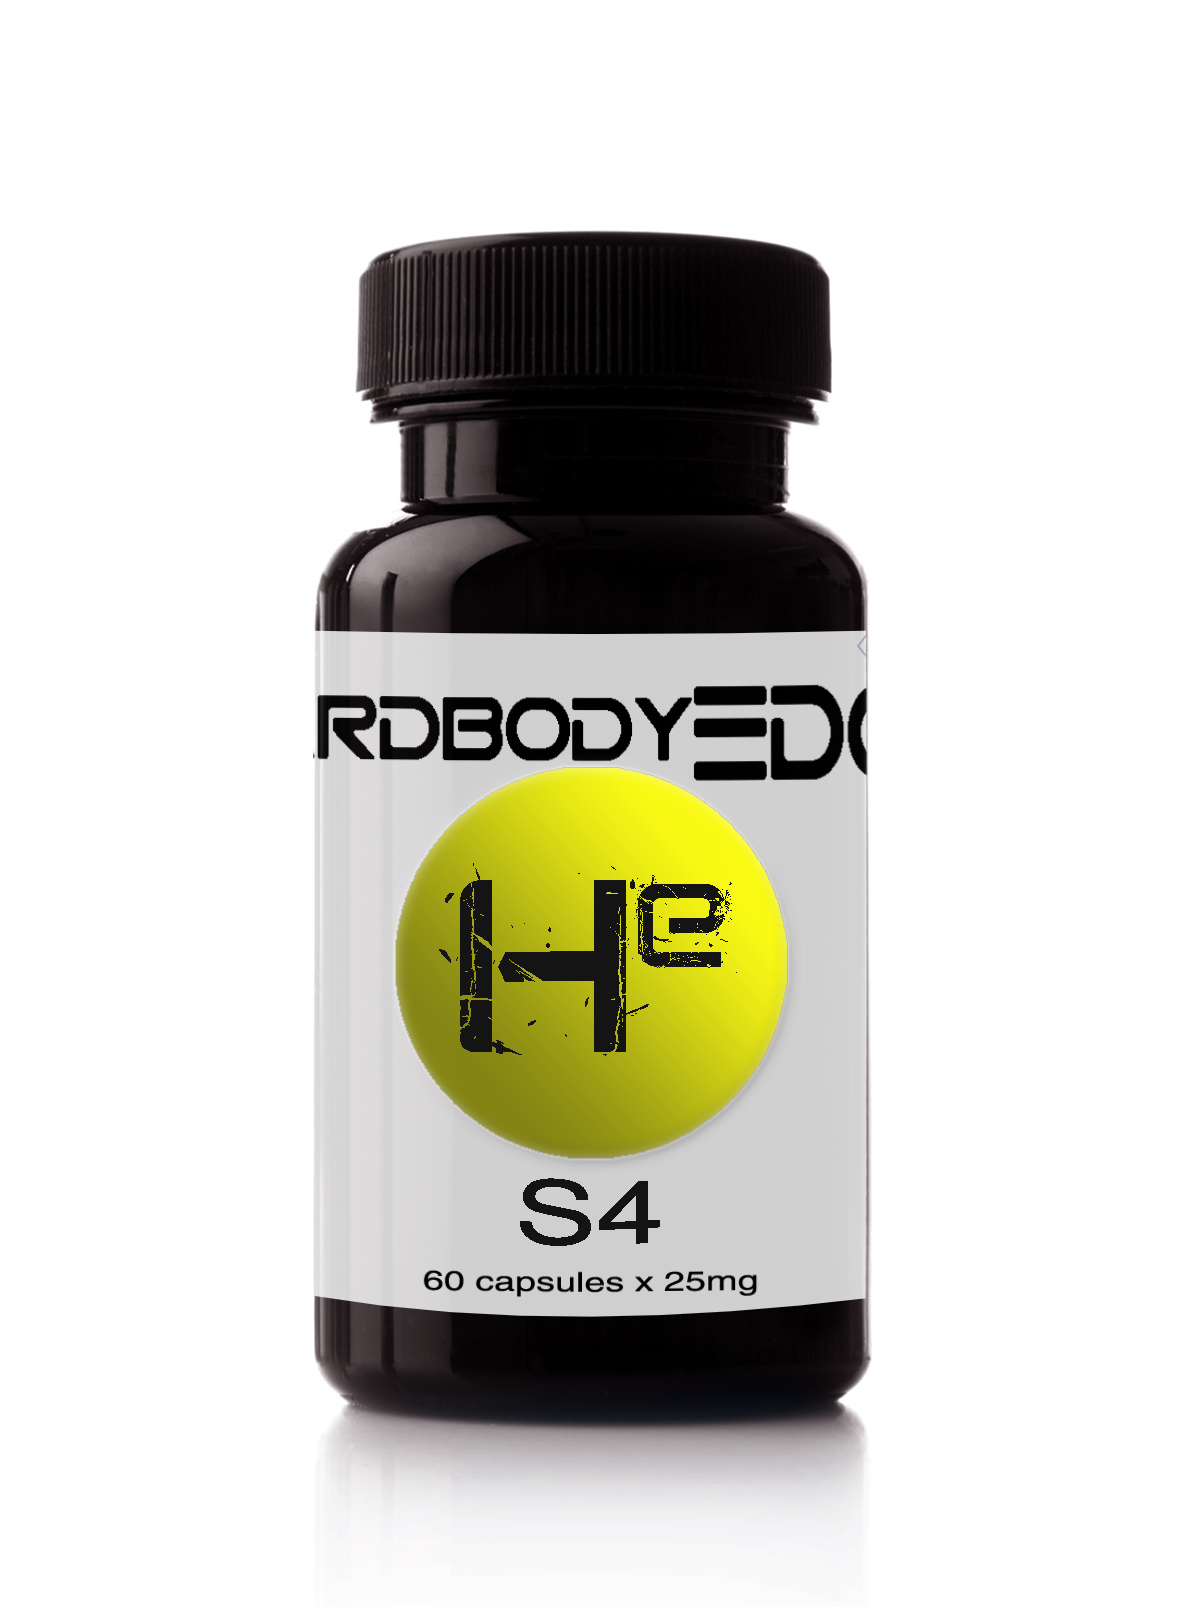 Andarine s4 review – five hidden benefits of this sarm - my blog about sarms and bodybuilding